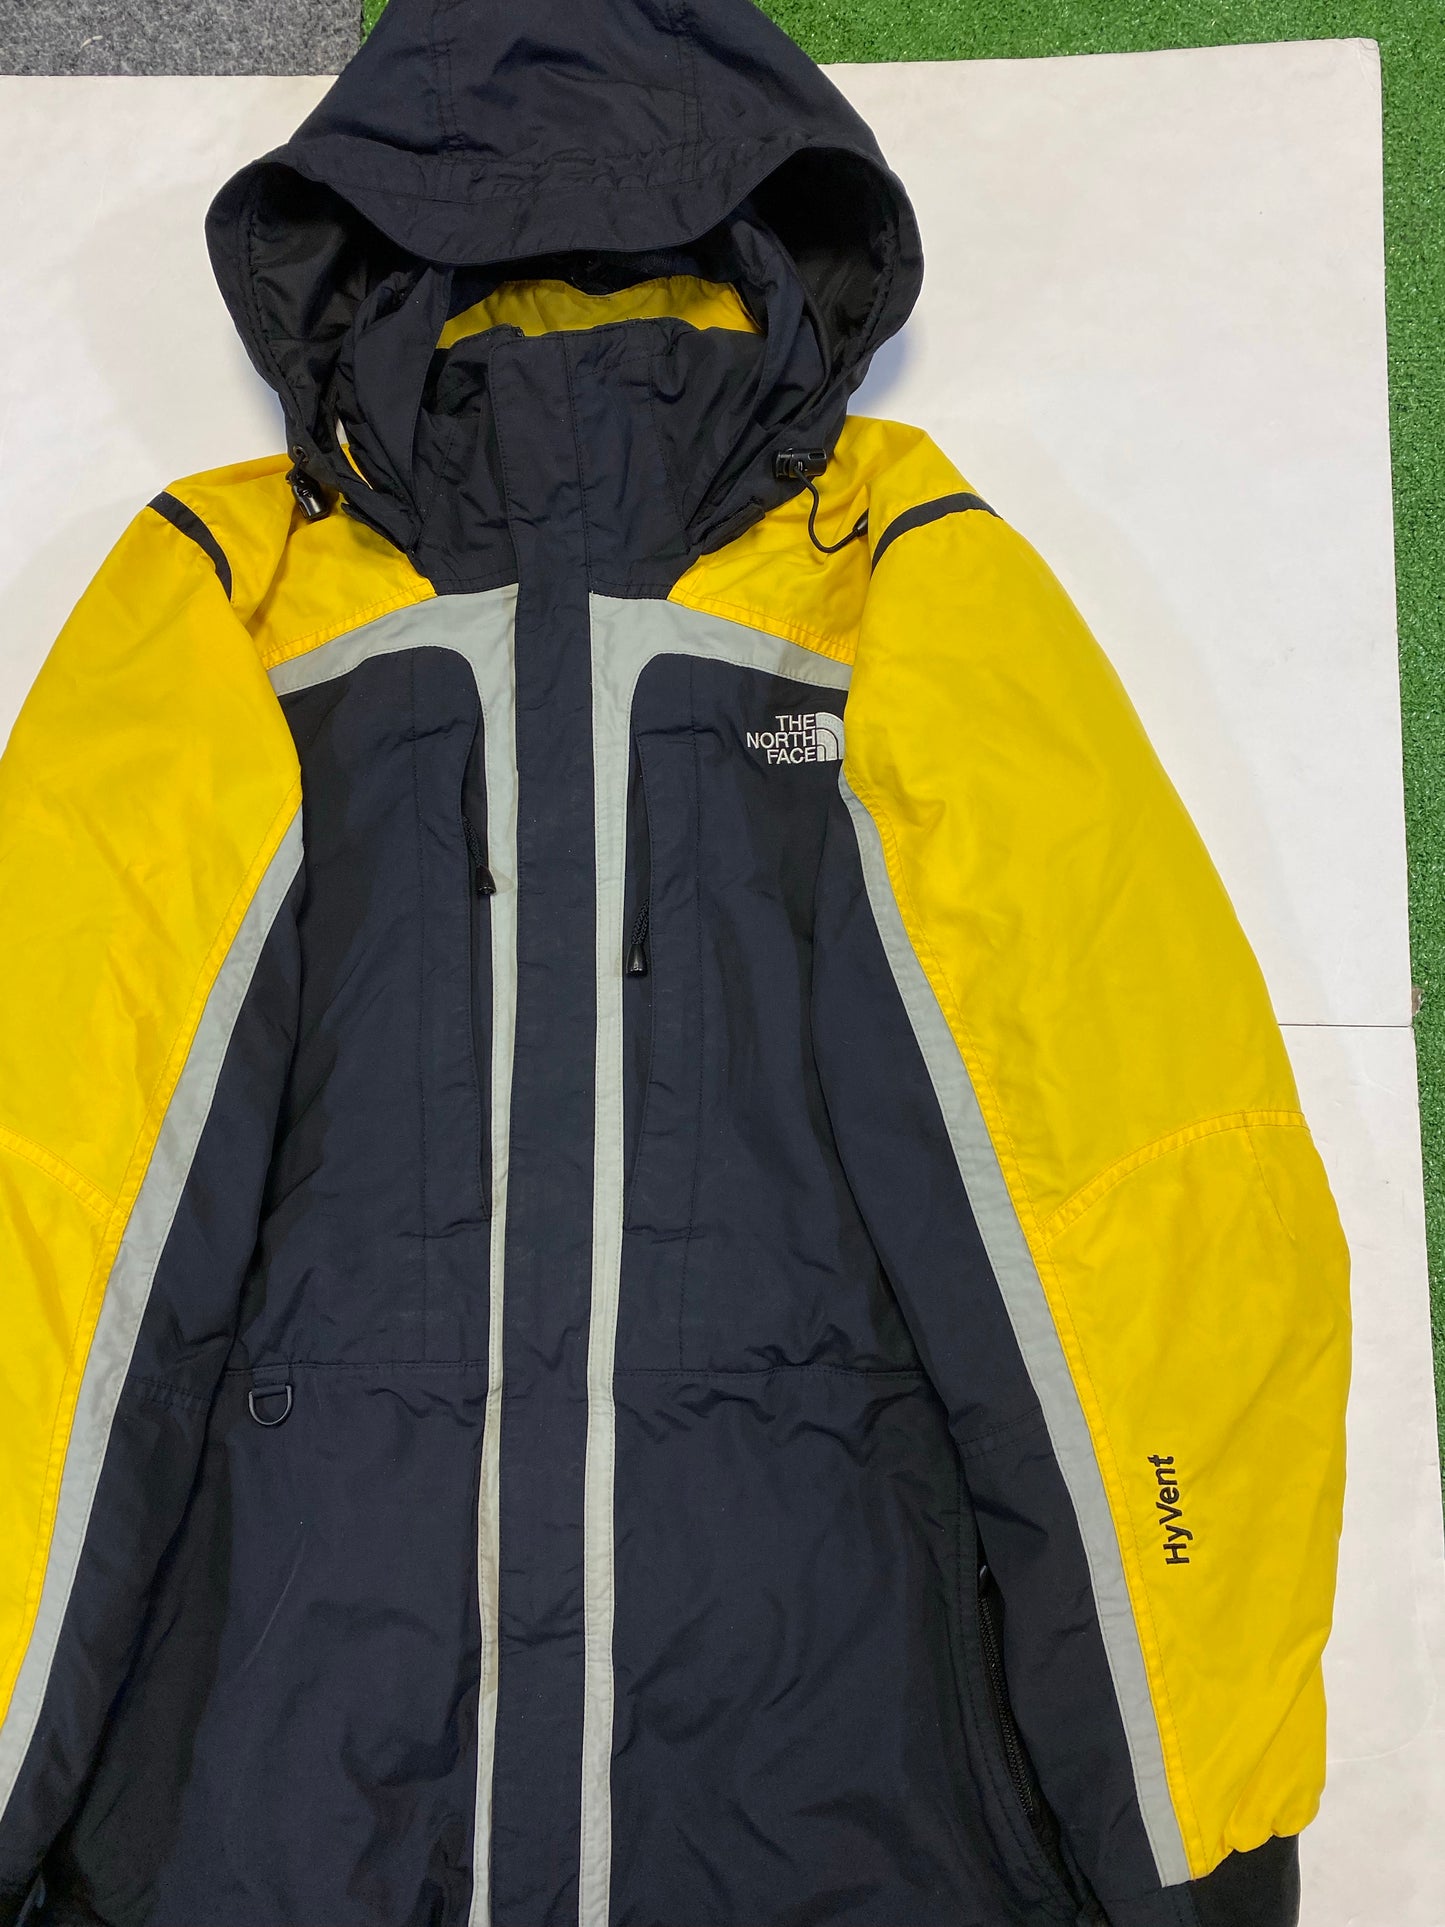 Vintage the North Face Hyvent Jacket 